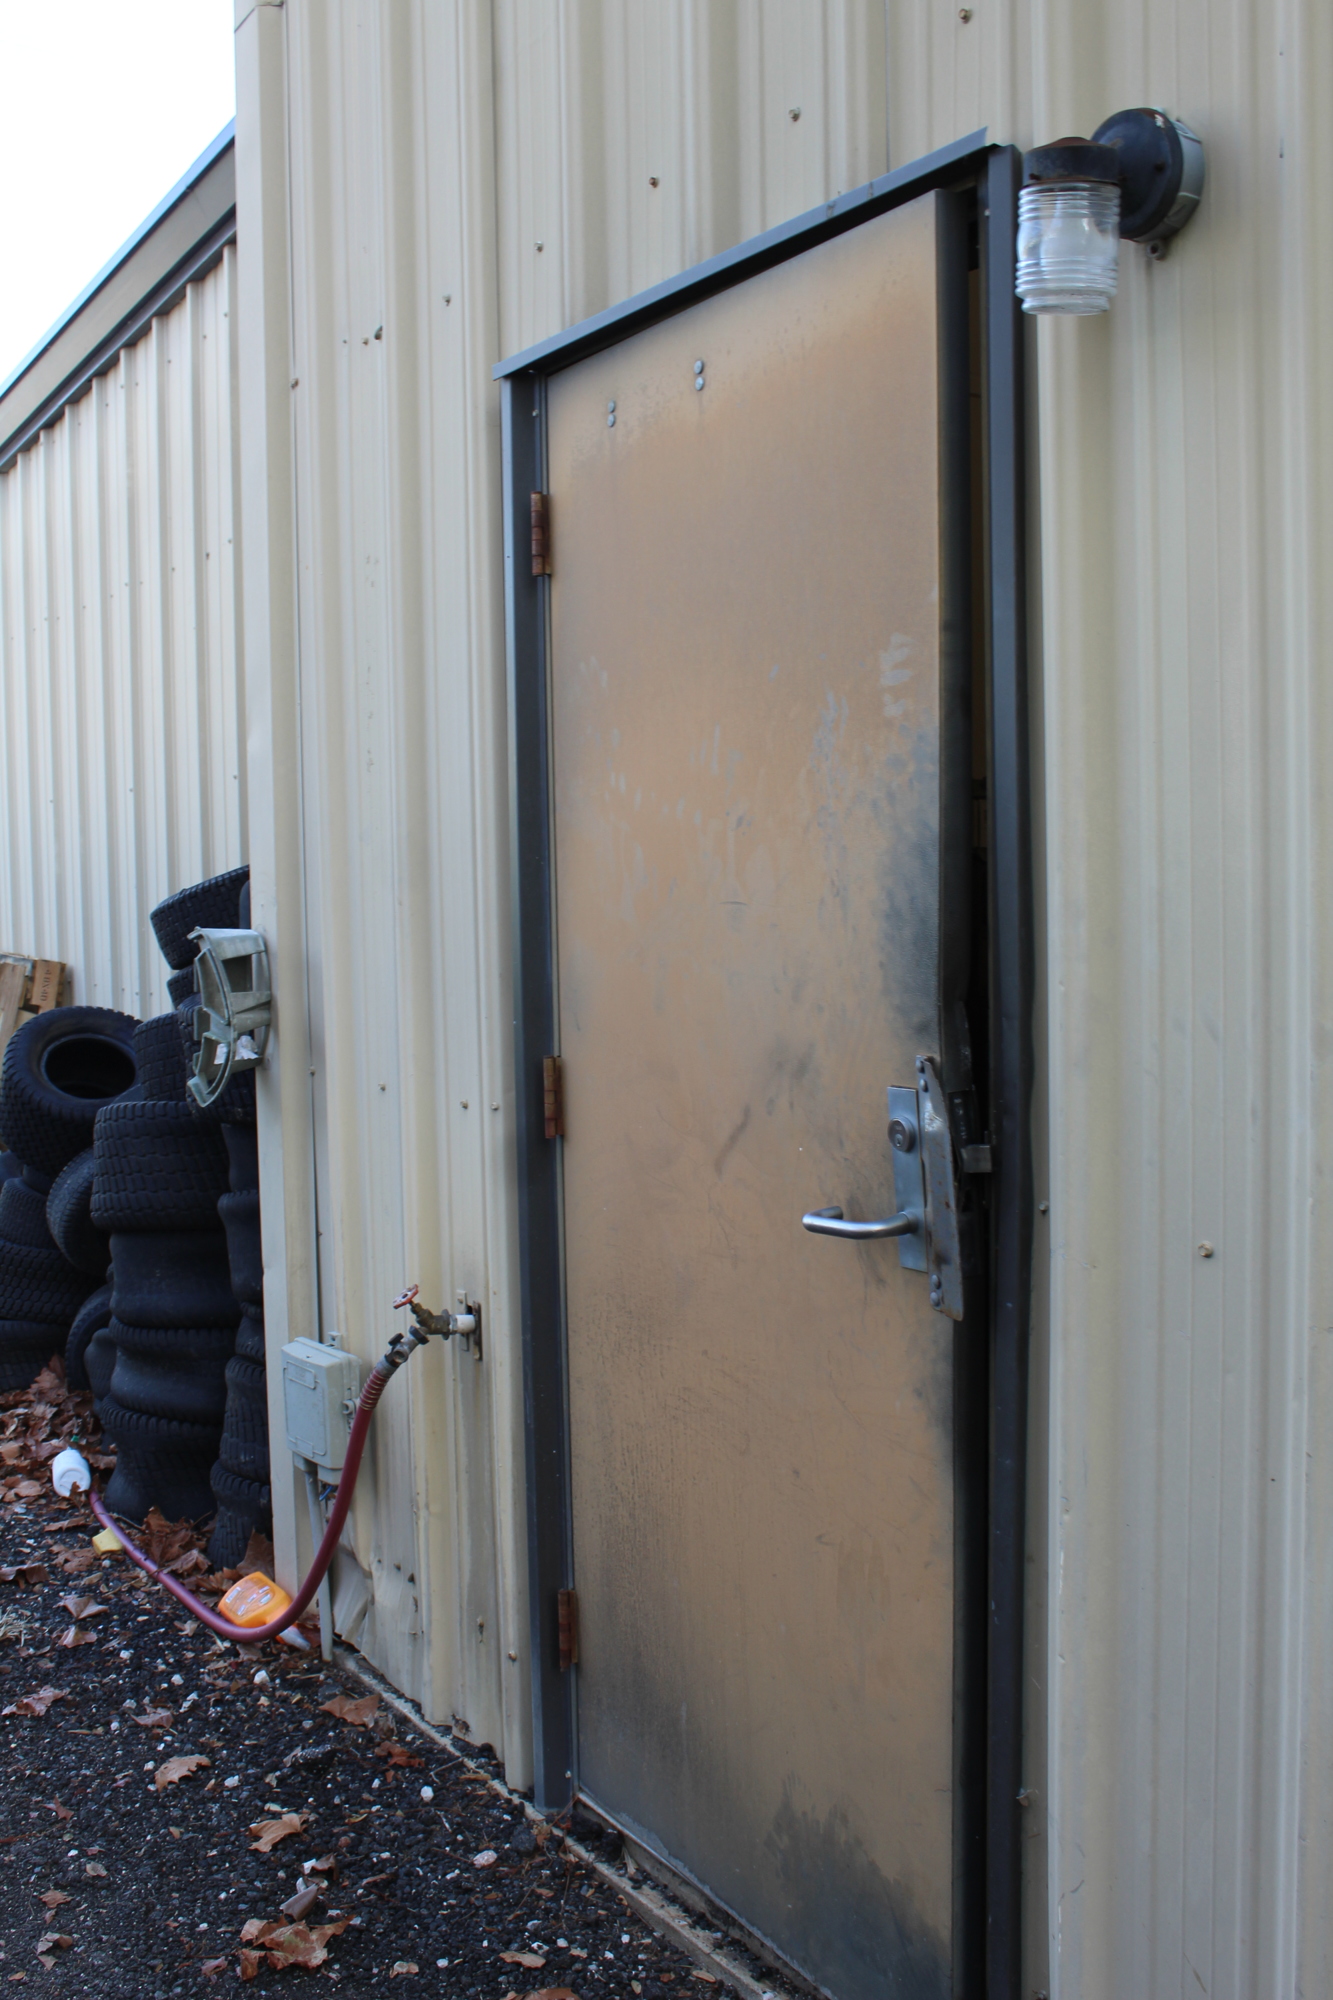 The side door in which the two individuals entered The Mower Depot. Photo by Jarleene Almenas